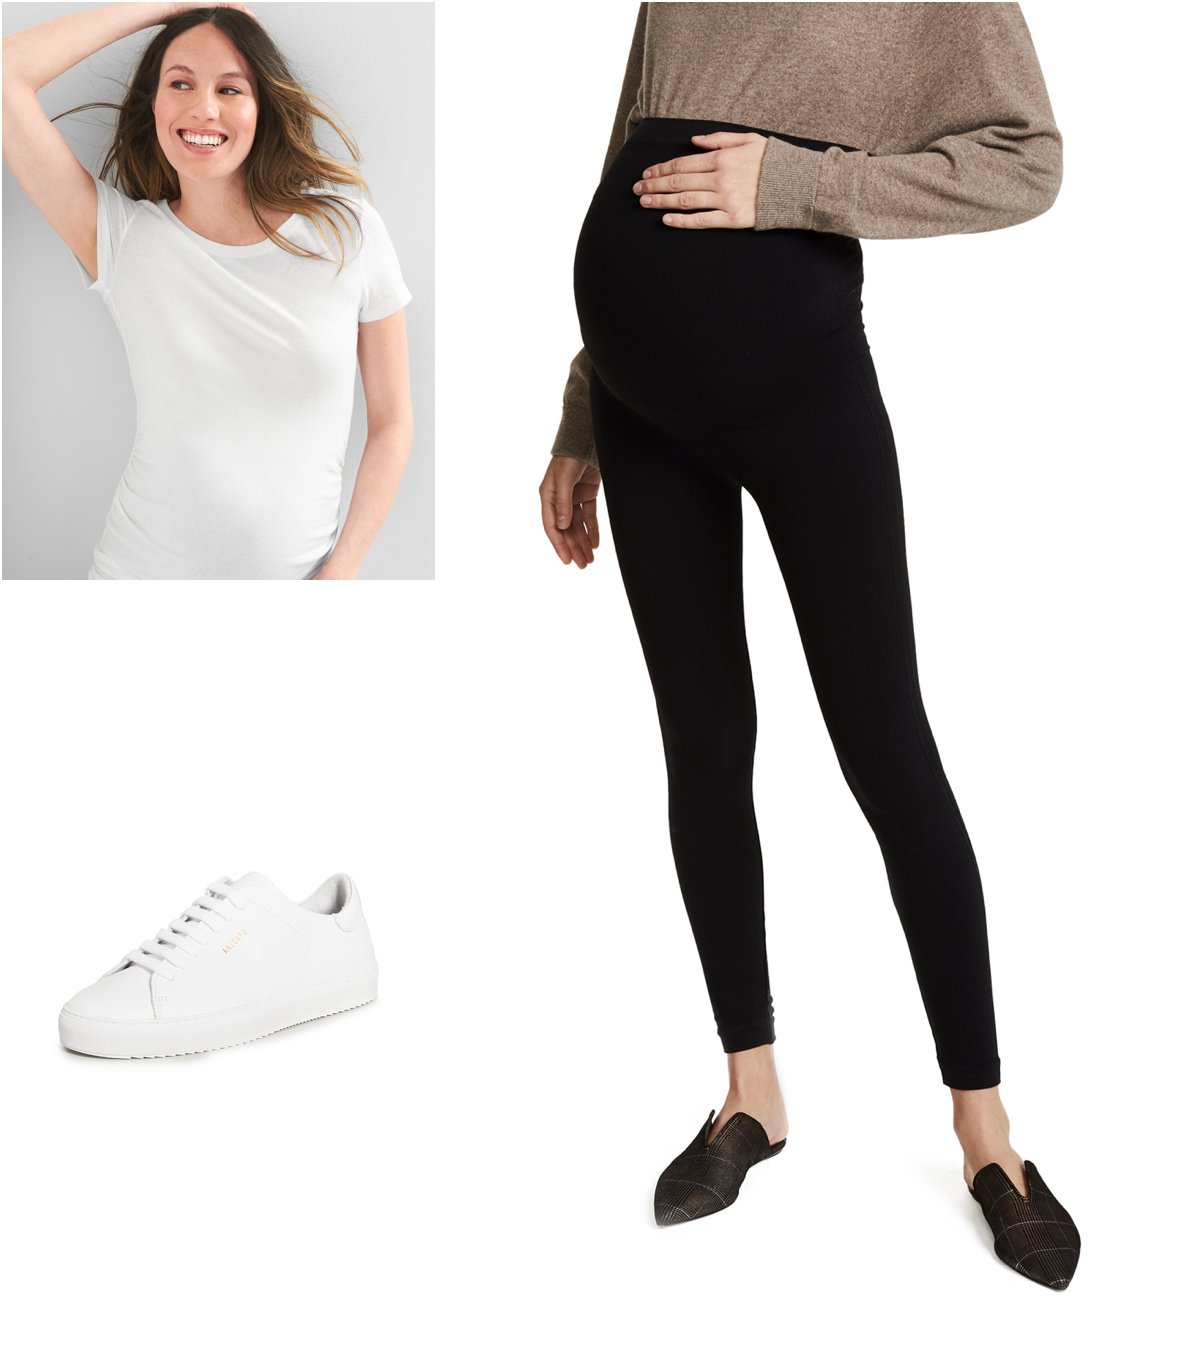 https://www.meagansmoda.com/wp-content/uploads/2021/03/Meagan-Brandon-fashion-blogger-of-Meagans-Moda-shares-outfit-idea-with-Spanx-maternity-leggings-white-tee-and-white-sneakers.jpg